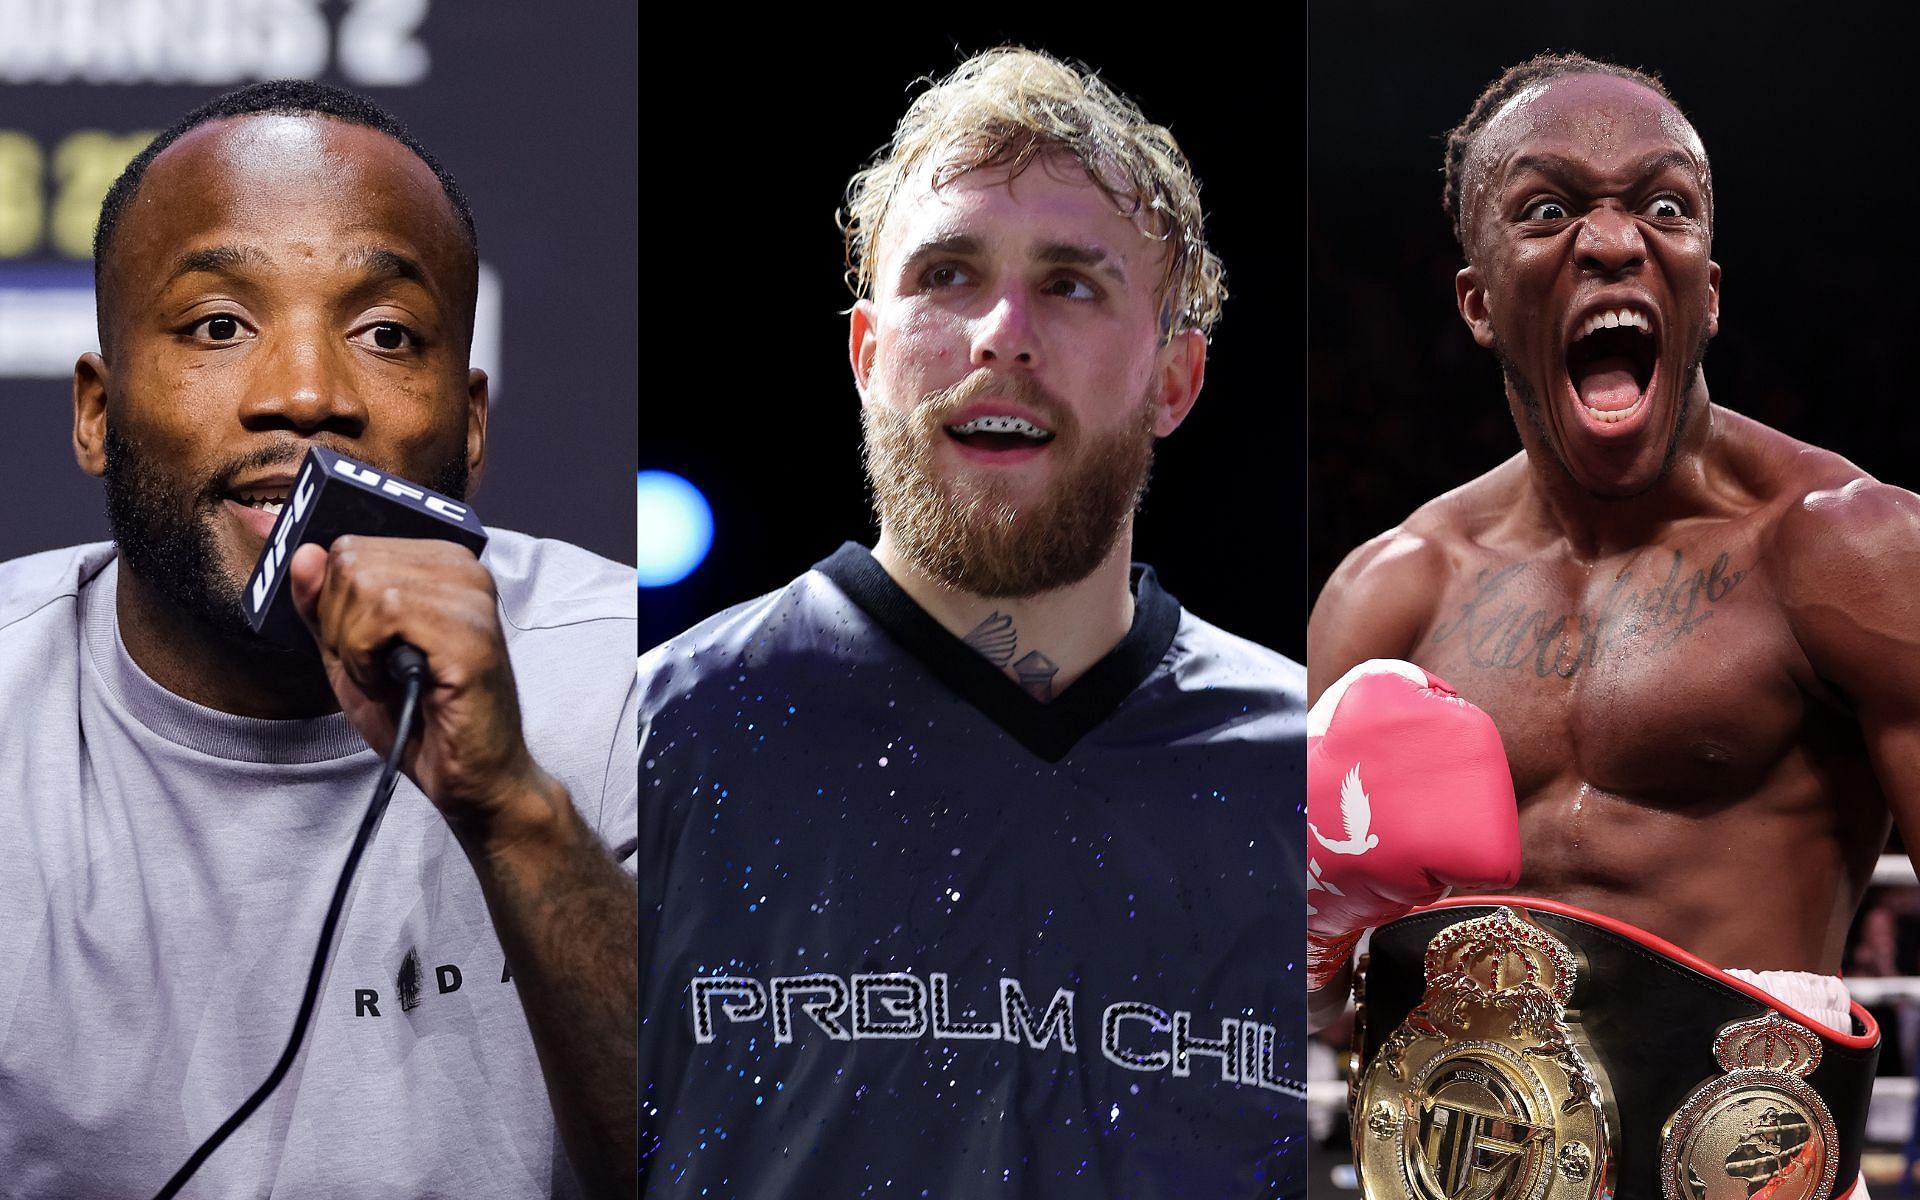 Leon Edwards (left), Jake Paul (center) and KSI (right) (Image credits Getty Images)